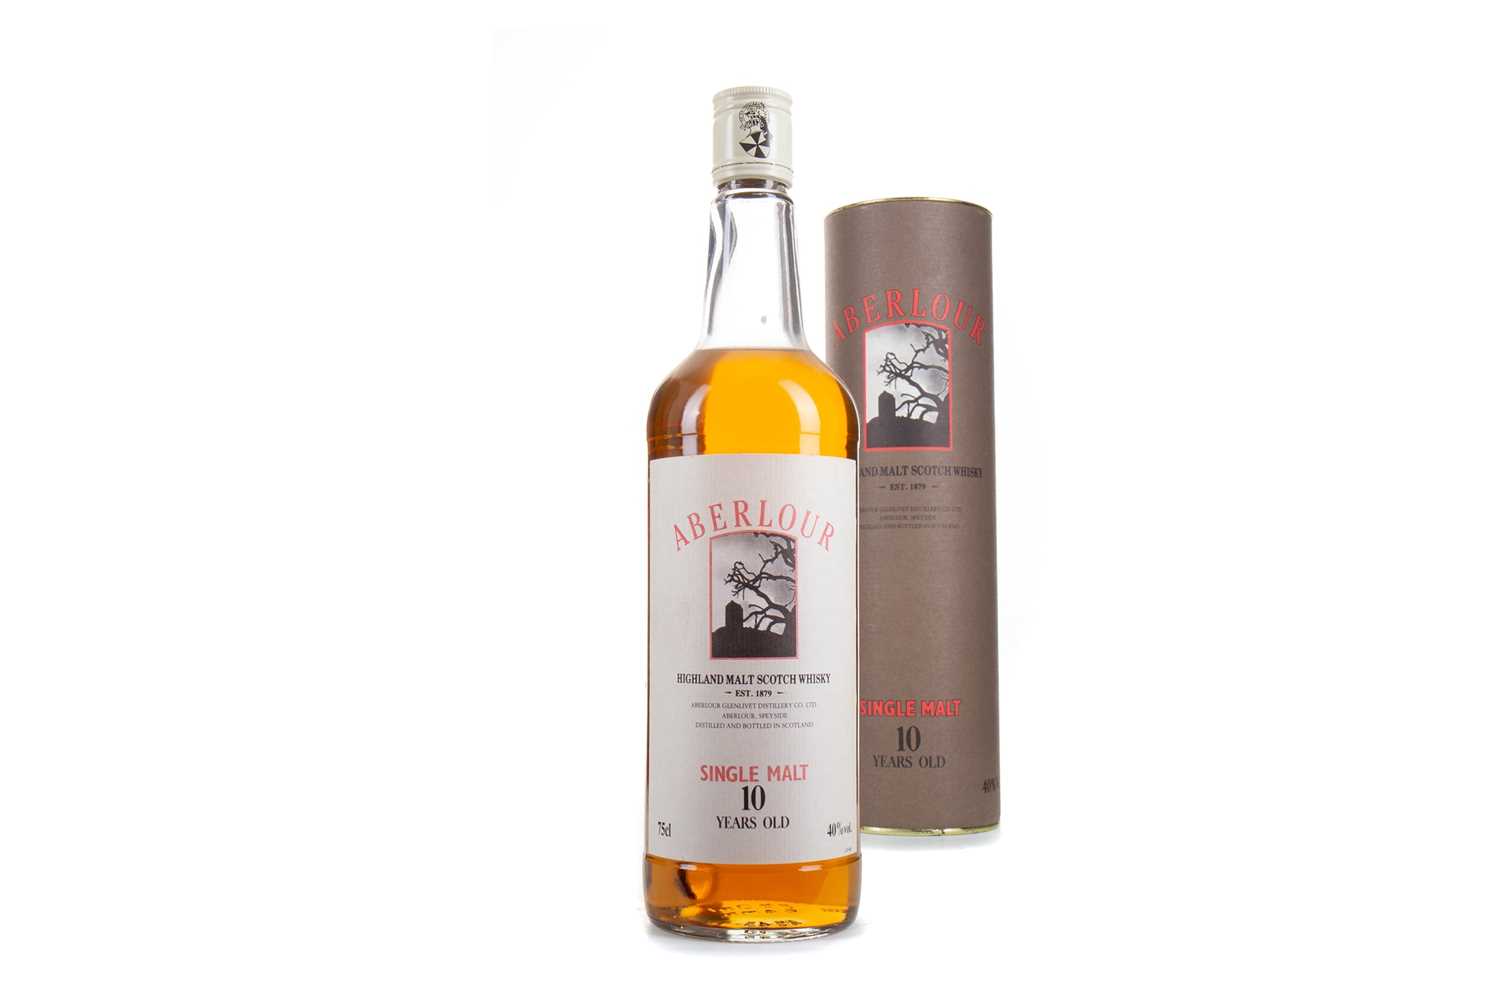 Lot 5 - ABERLOUR 10 YEAR OLD 75CL